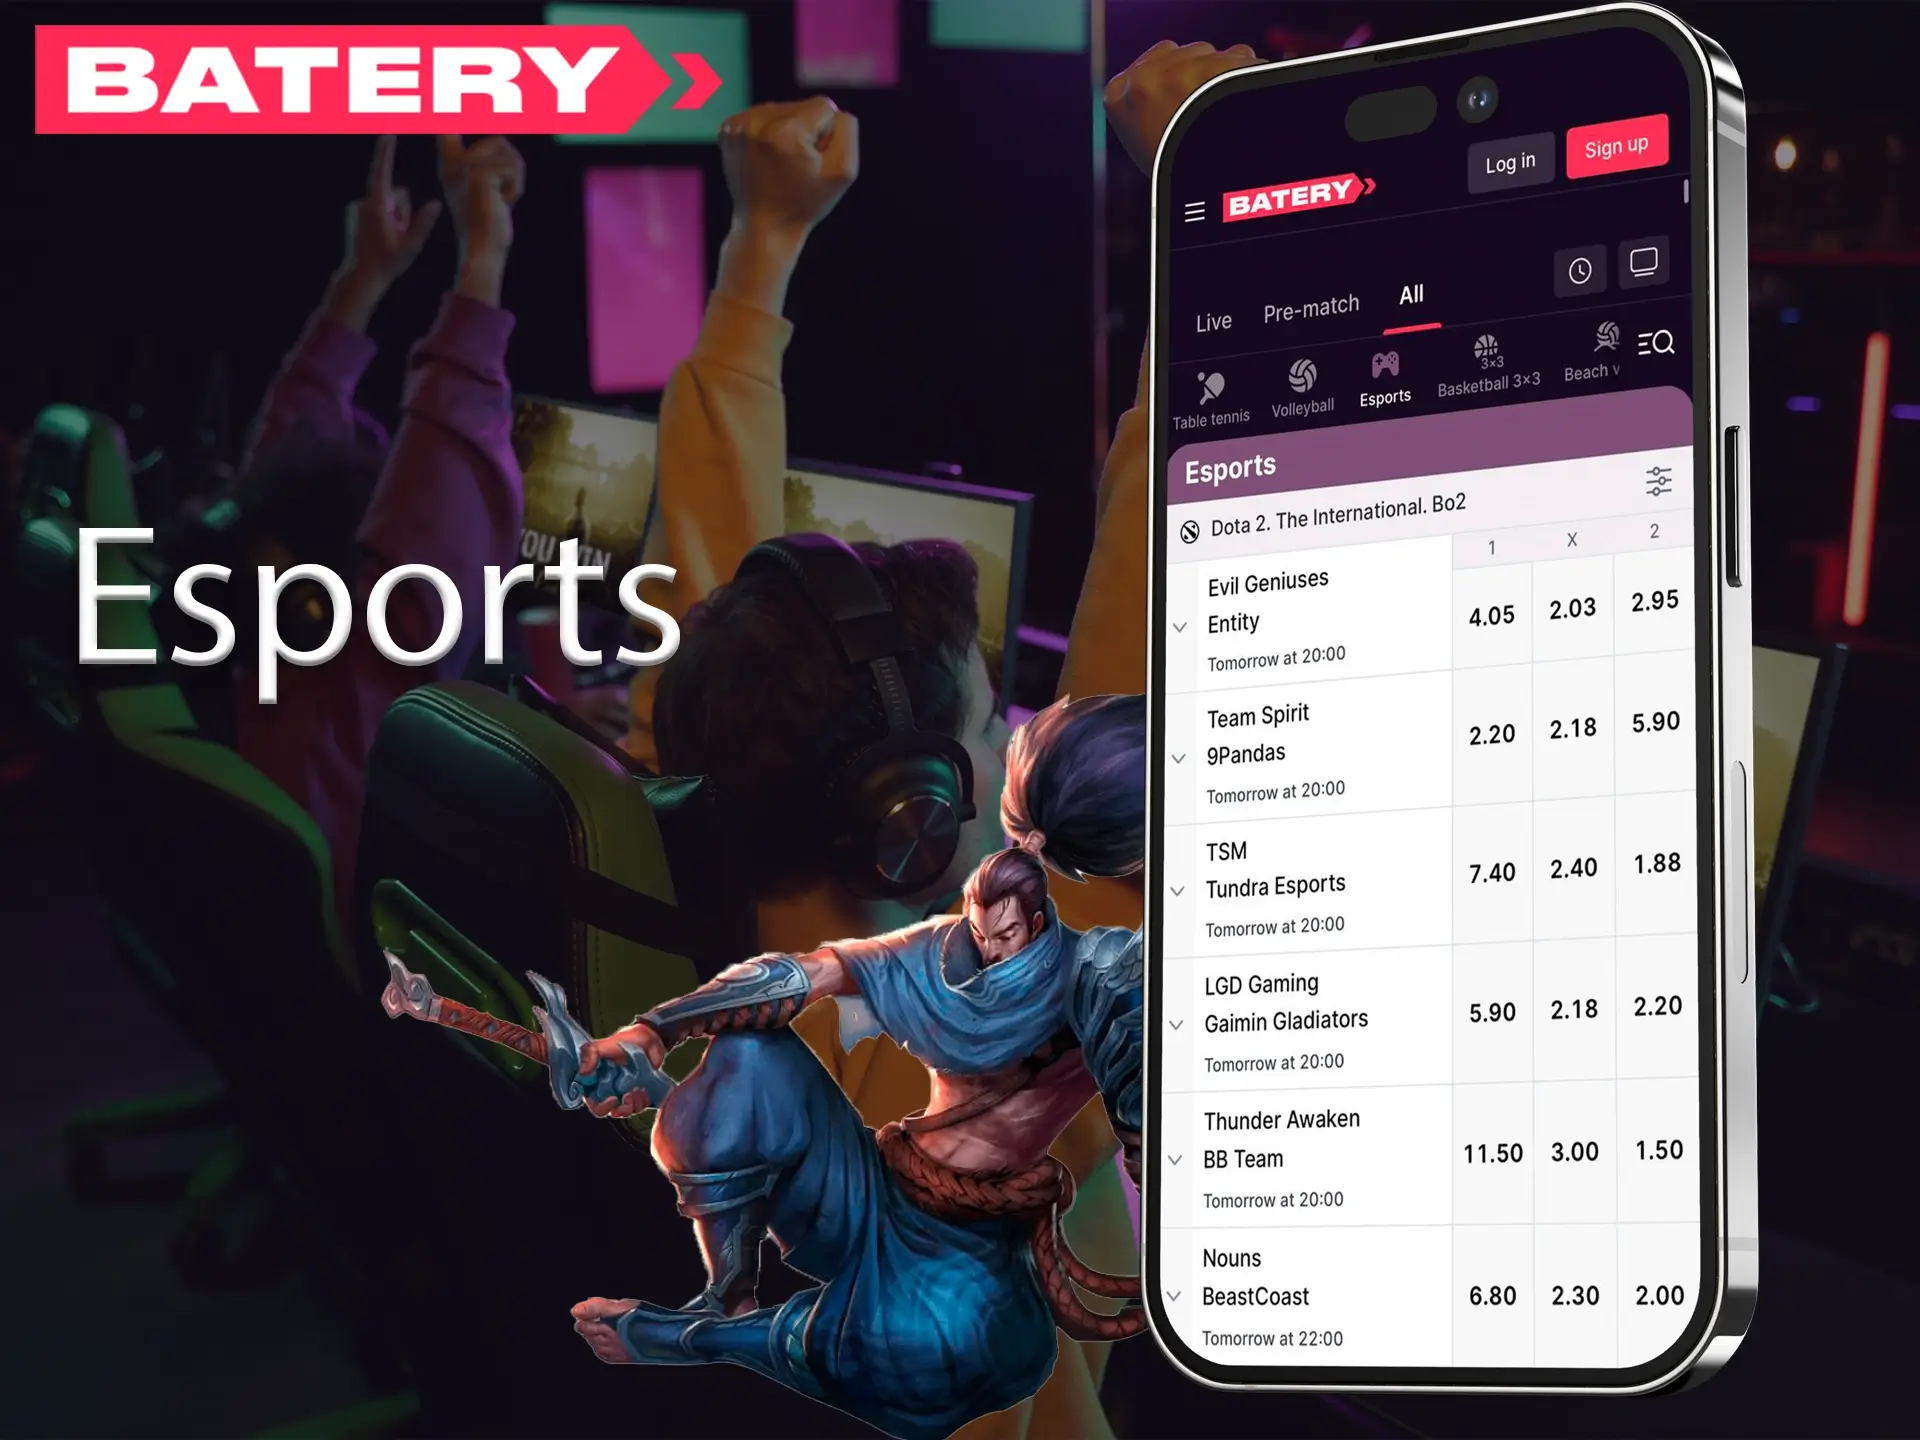 Fans of cyber sports will find a wide range of available games and outcomes for them in the Batery app.